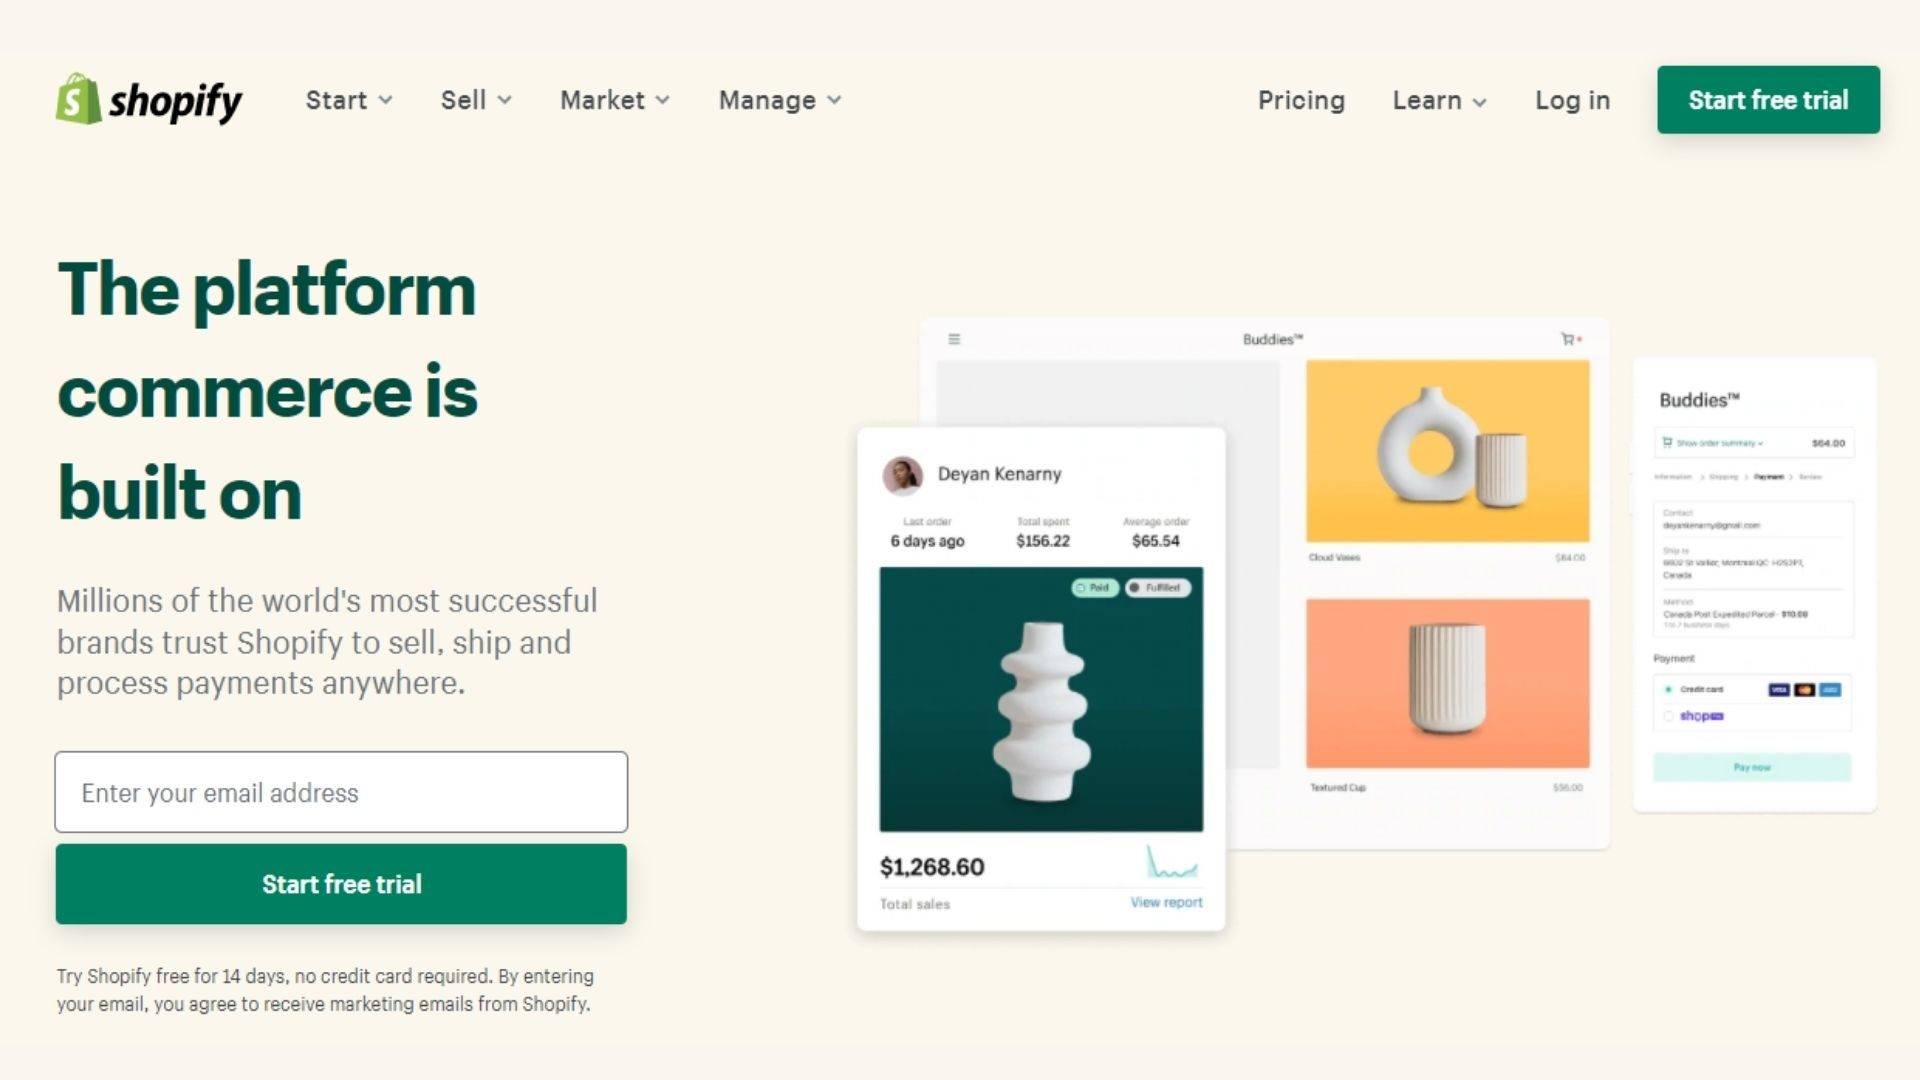 saas landing pages example shopify